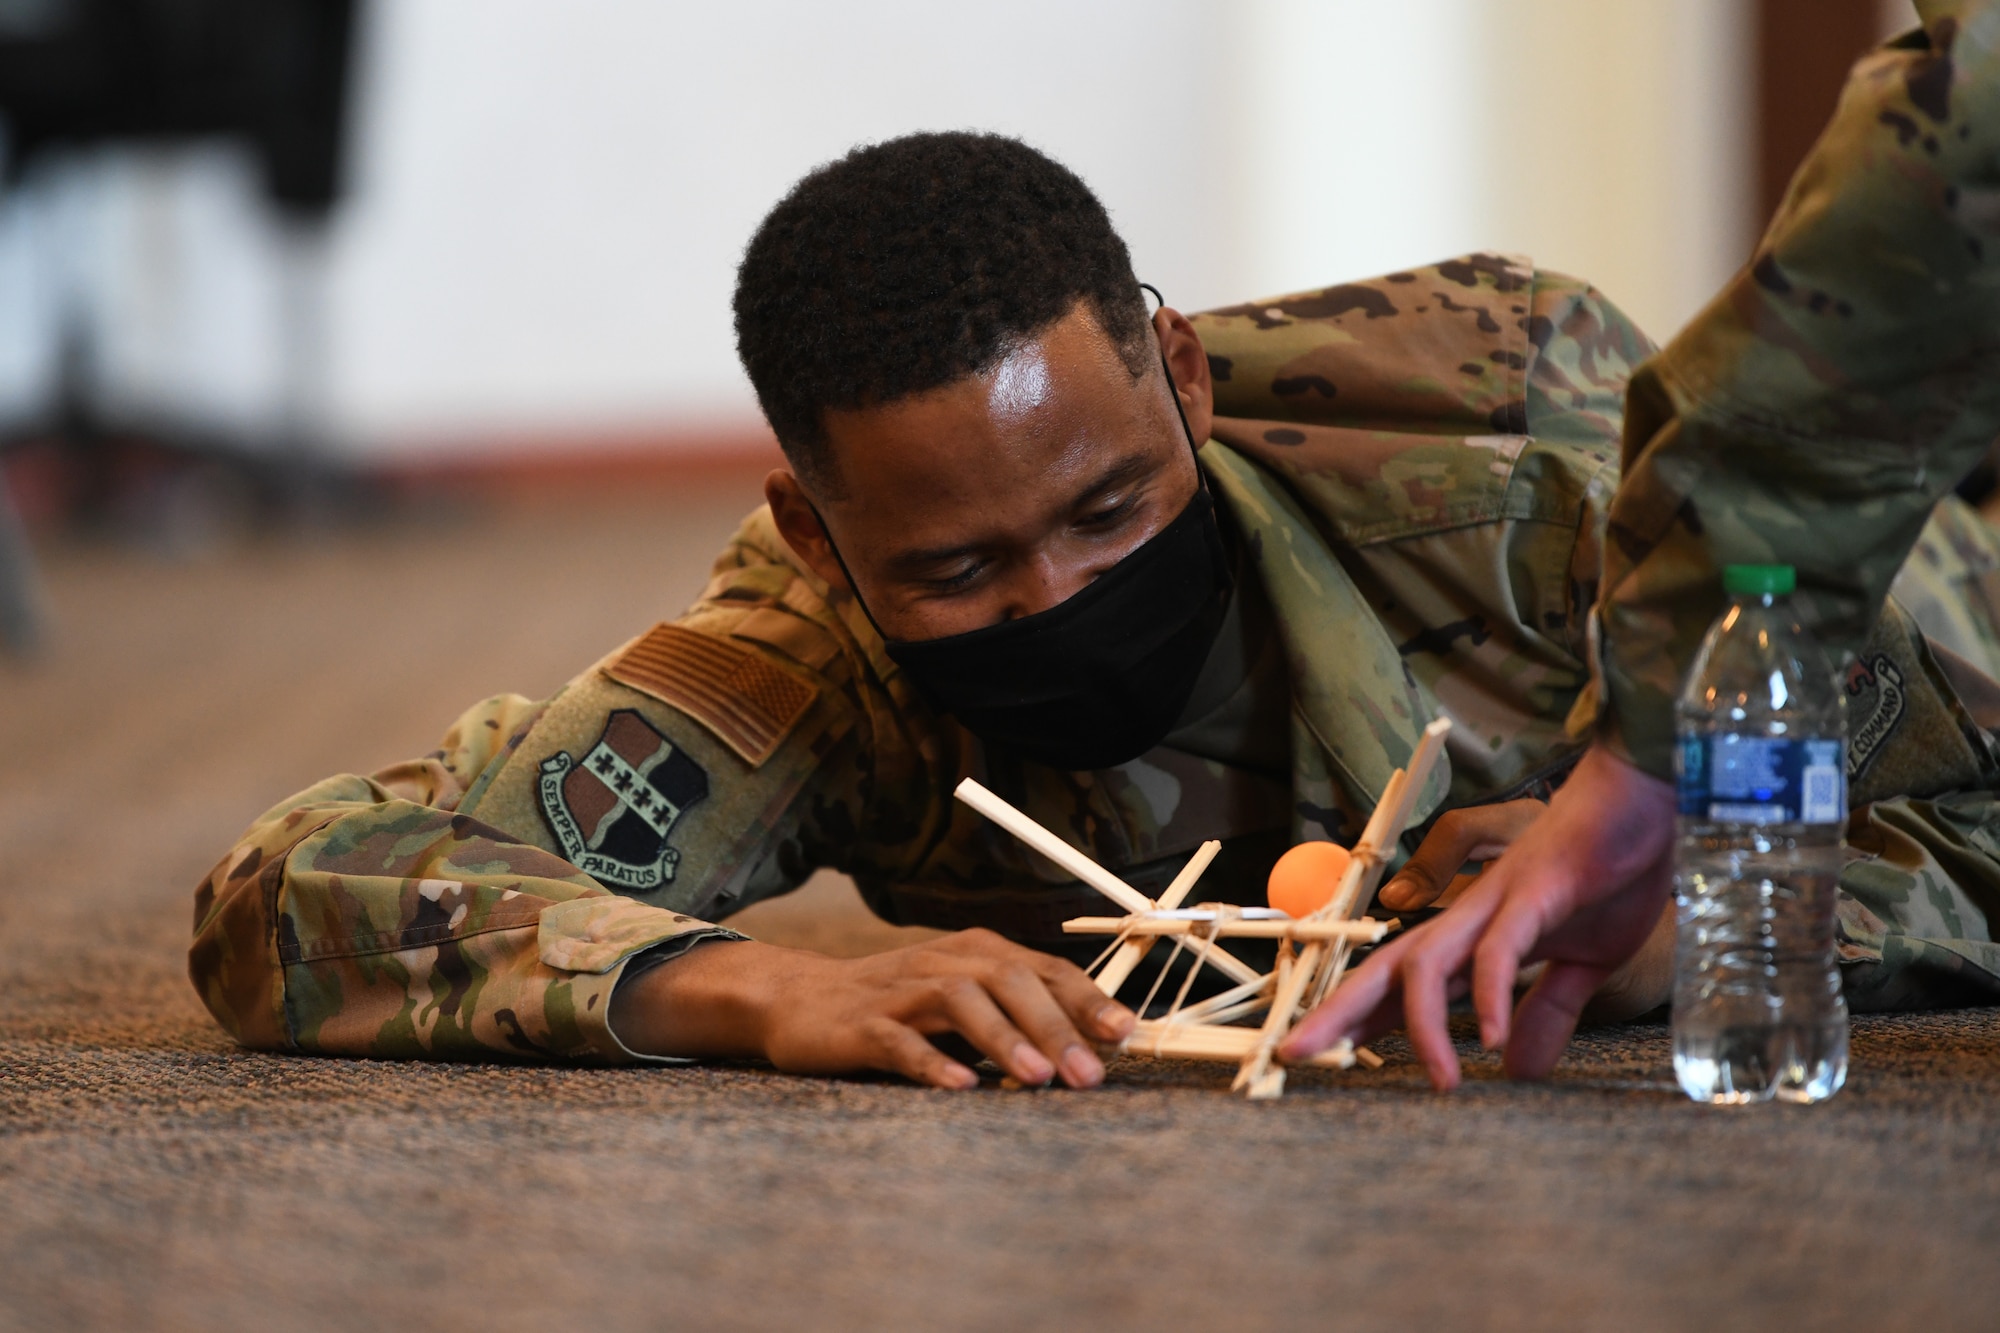 Airman 1st Class Brian Westmoreland, 9th Maintenance Squadron aircraft fuel systems specialist, prepares to launch a ball from a catapult during a teamwork-building exercise, March 29, 2021, at Beale Air Force Base California. The teamwork-building exercise was part of the Spiritual ISR(Intelligence Surveillance and Reconnaissance) Program. (U.S. Air Force photo by Airman 1st Class Luis A. Ruiz-Vazquez)